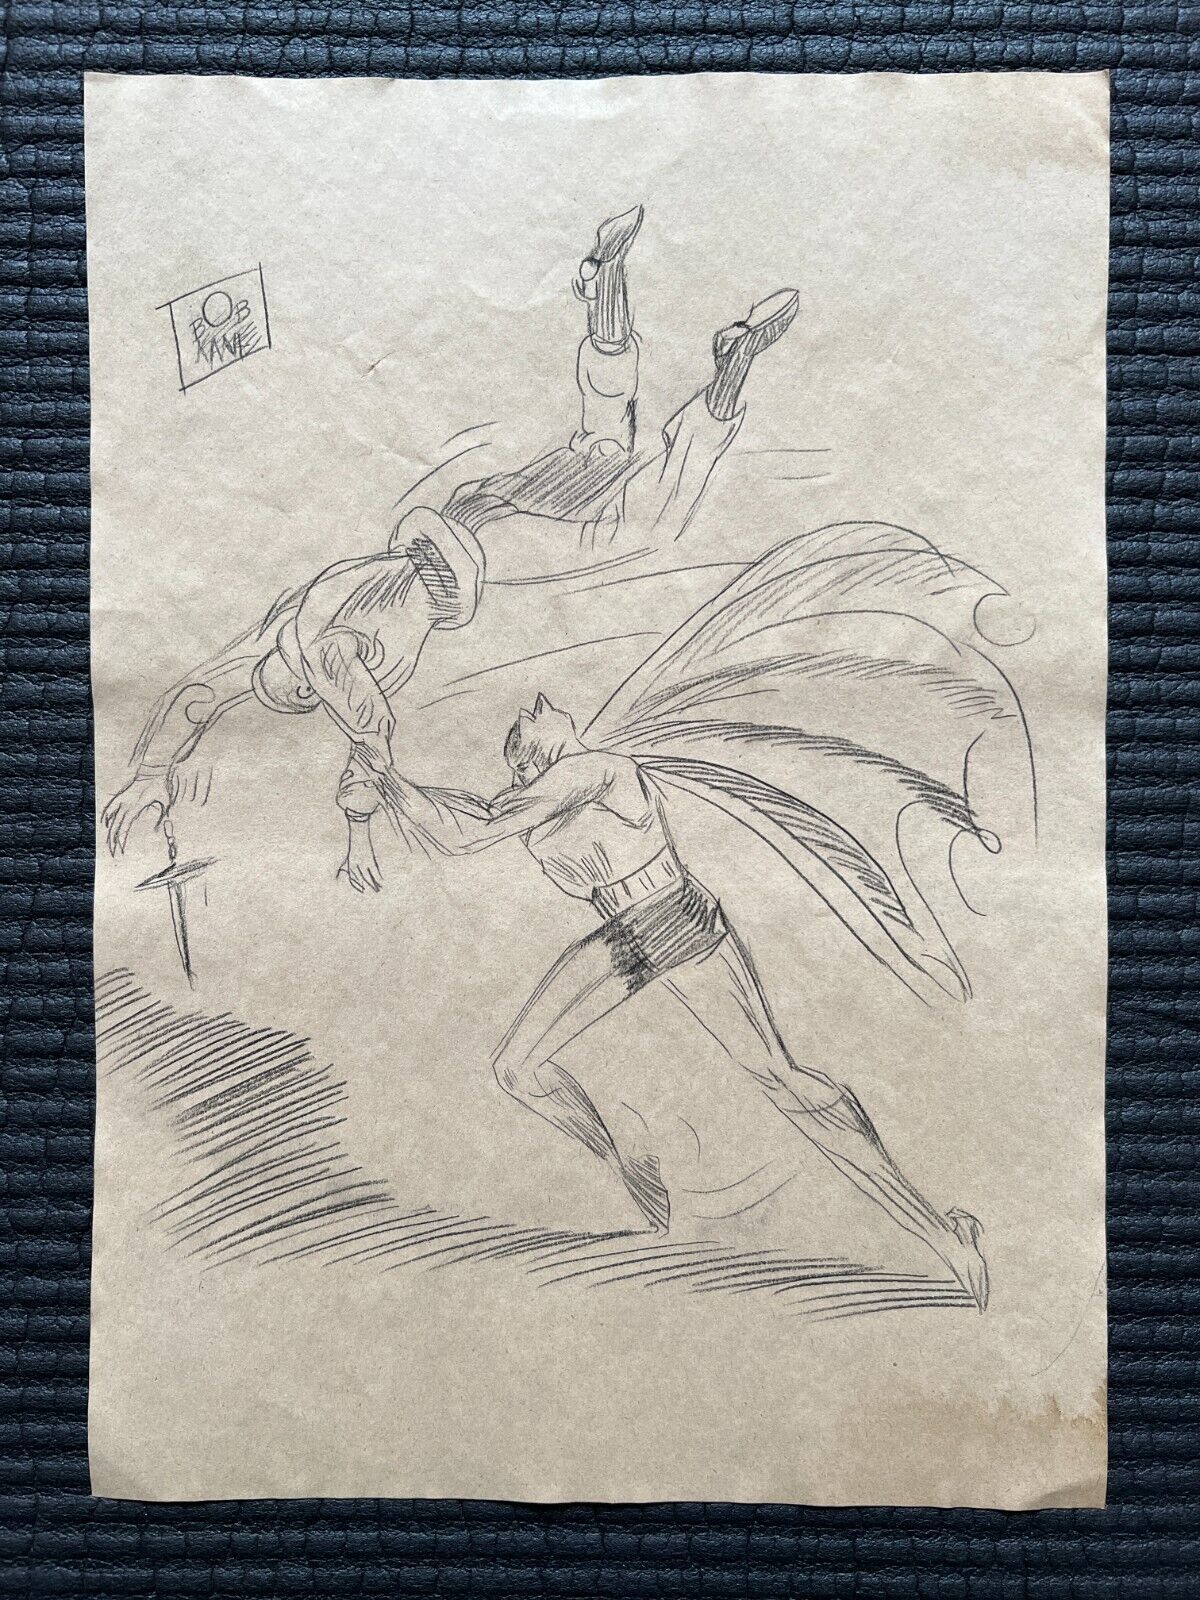 BOB KANE Handmade) Drawing - Painting Inks on old paper signed & stamped